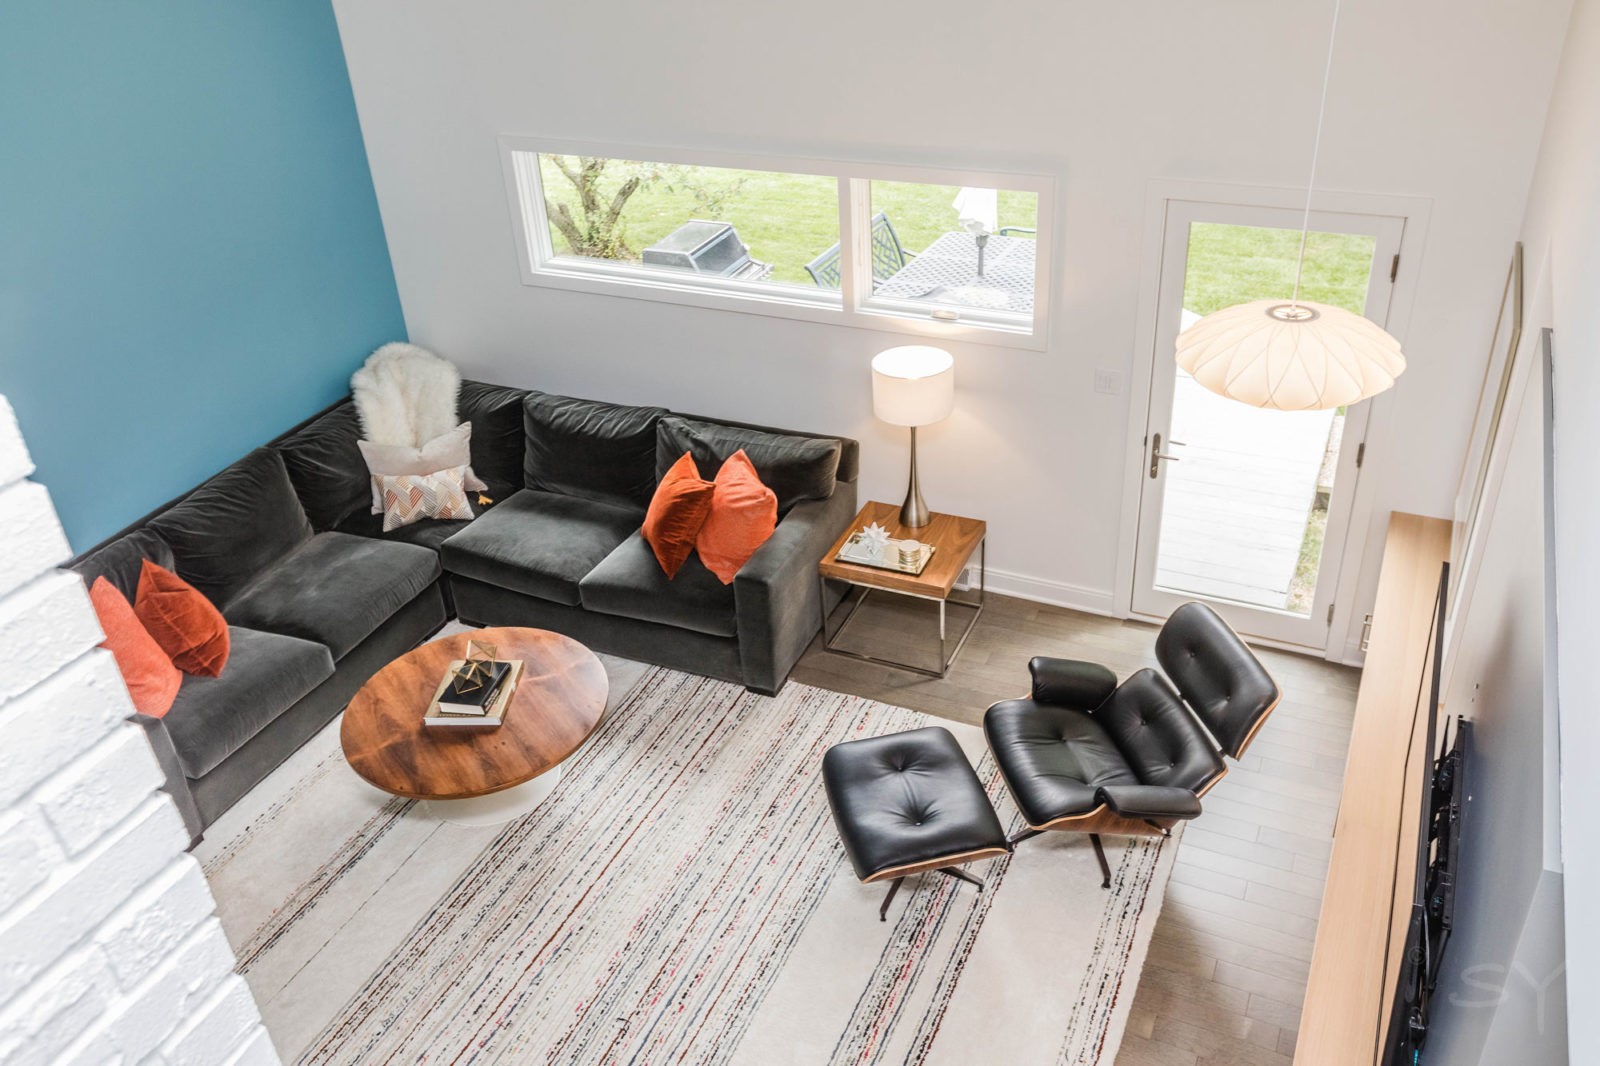 LivCo living room renovation overhead view mid century modern style décor white and blue walls